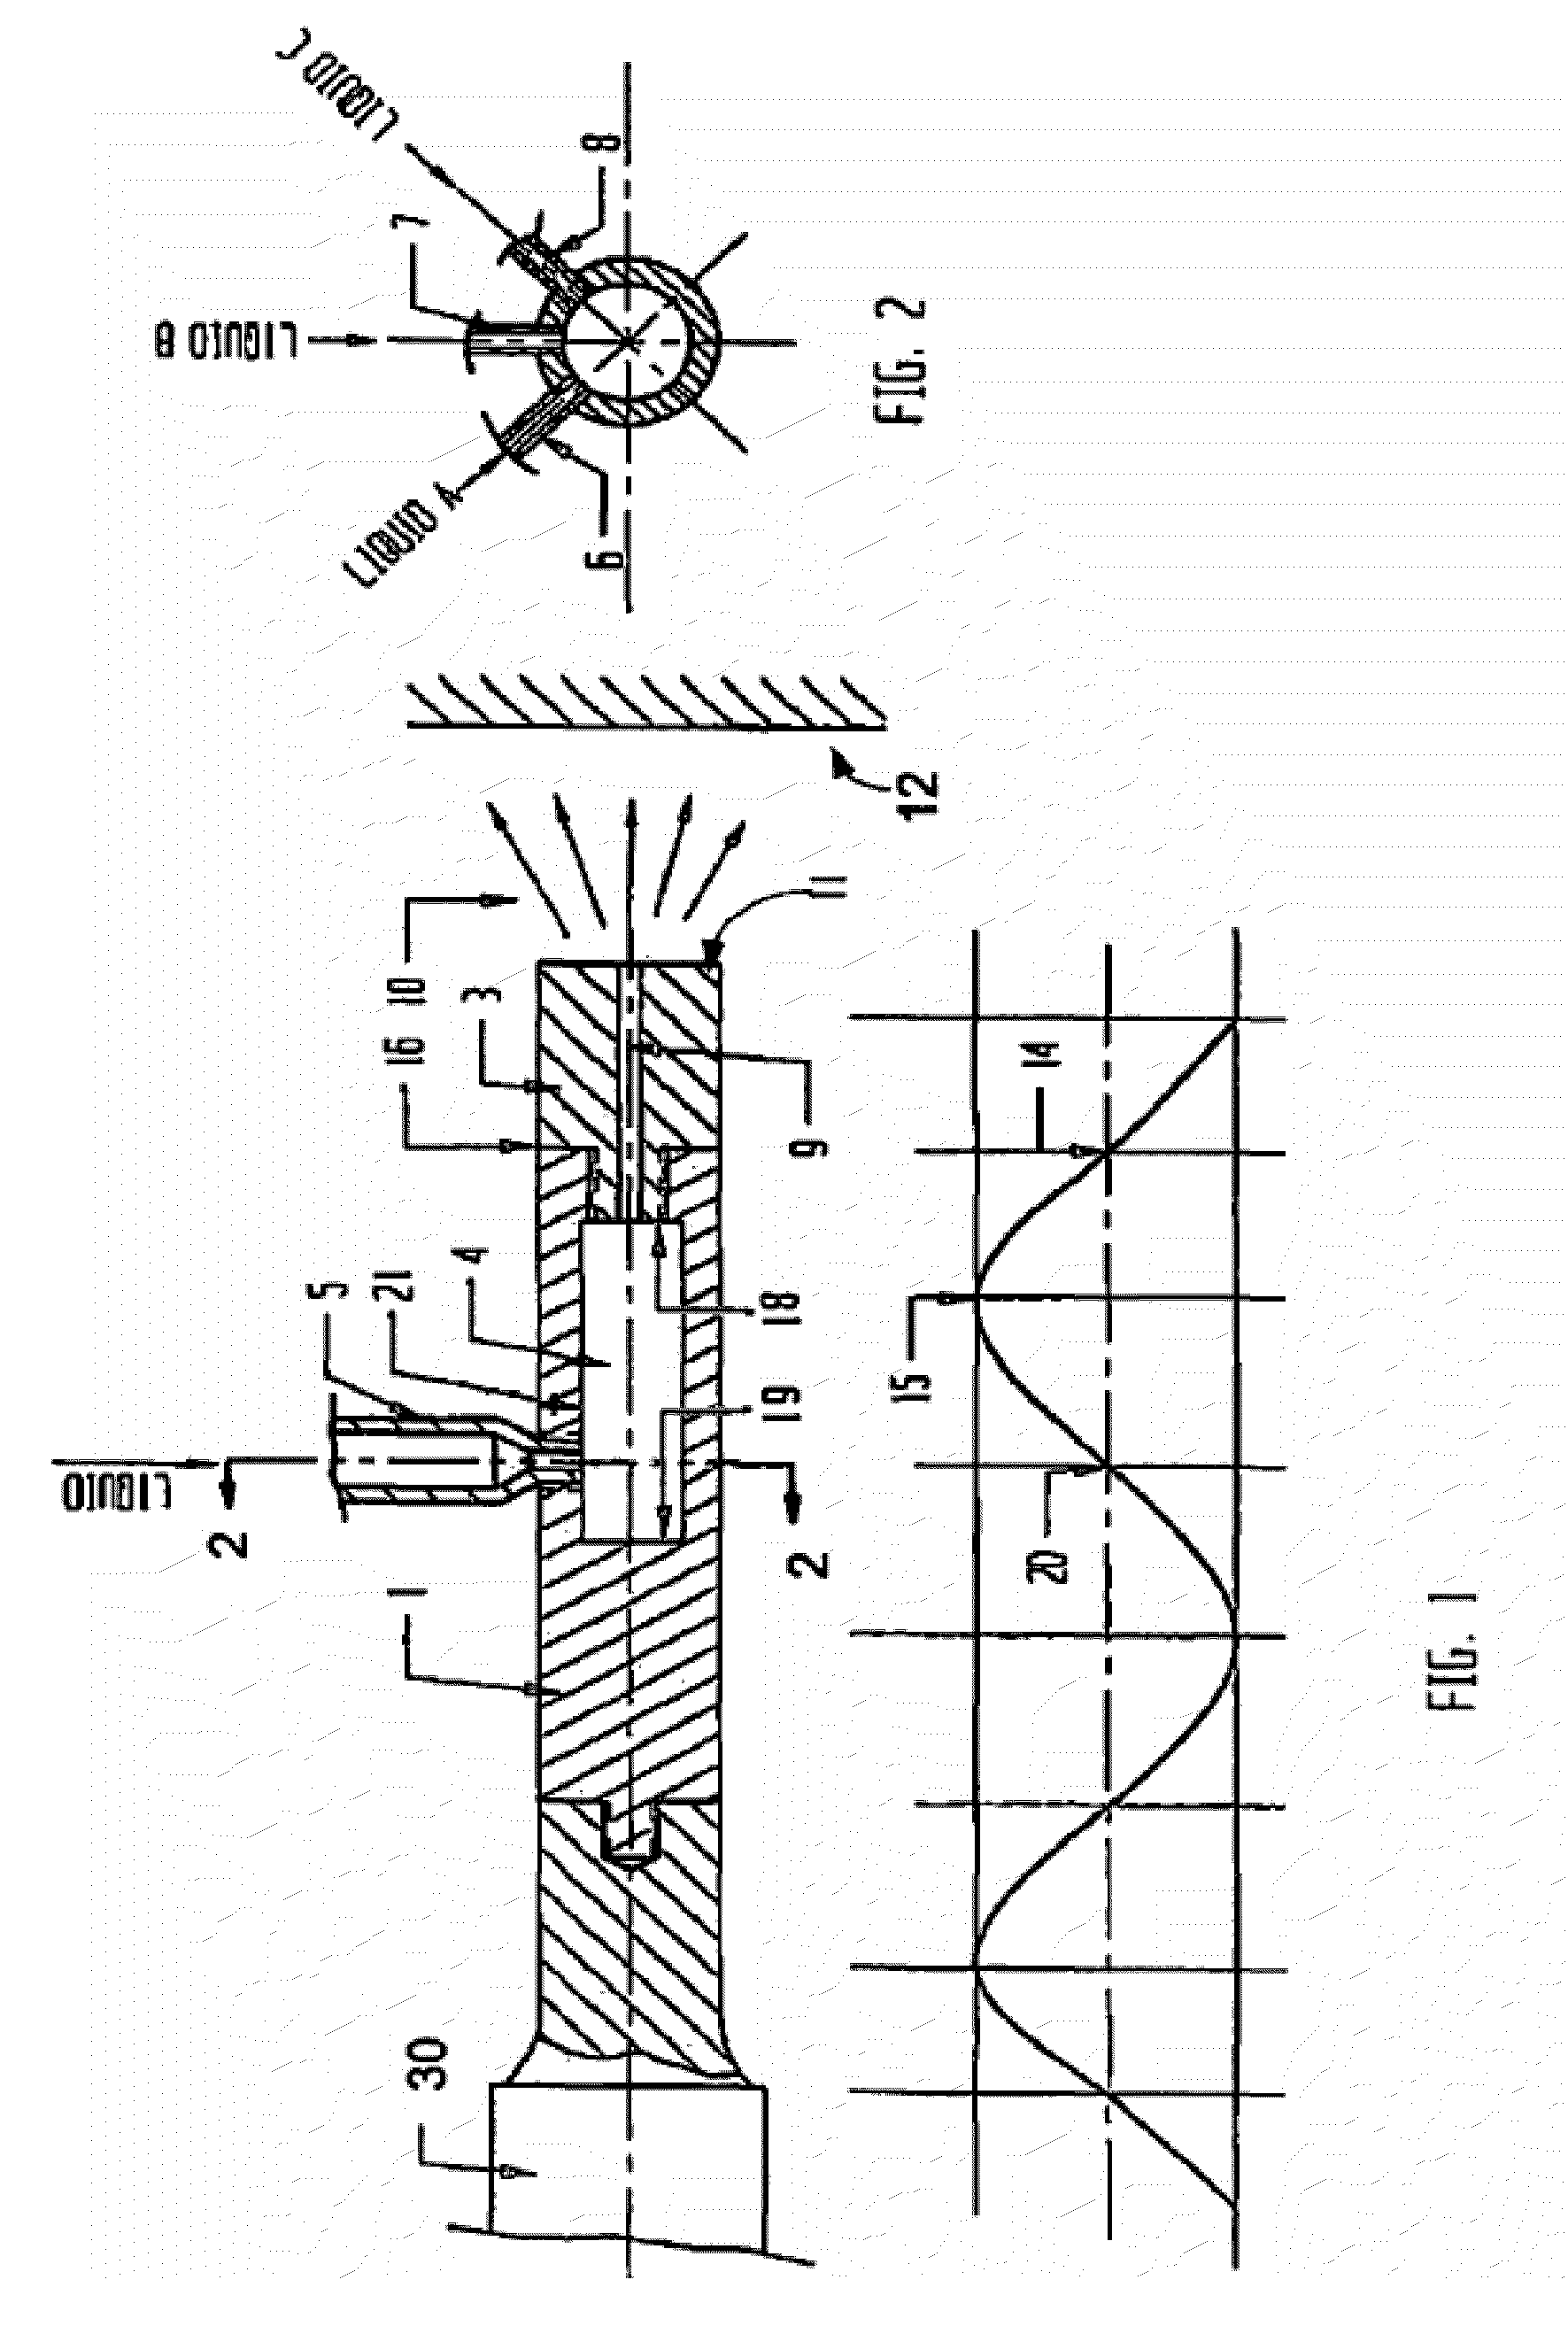 Ultrasound apparatus and methods for mixing liquids and coating stents